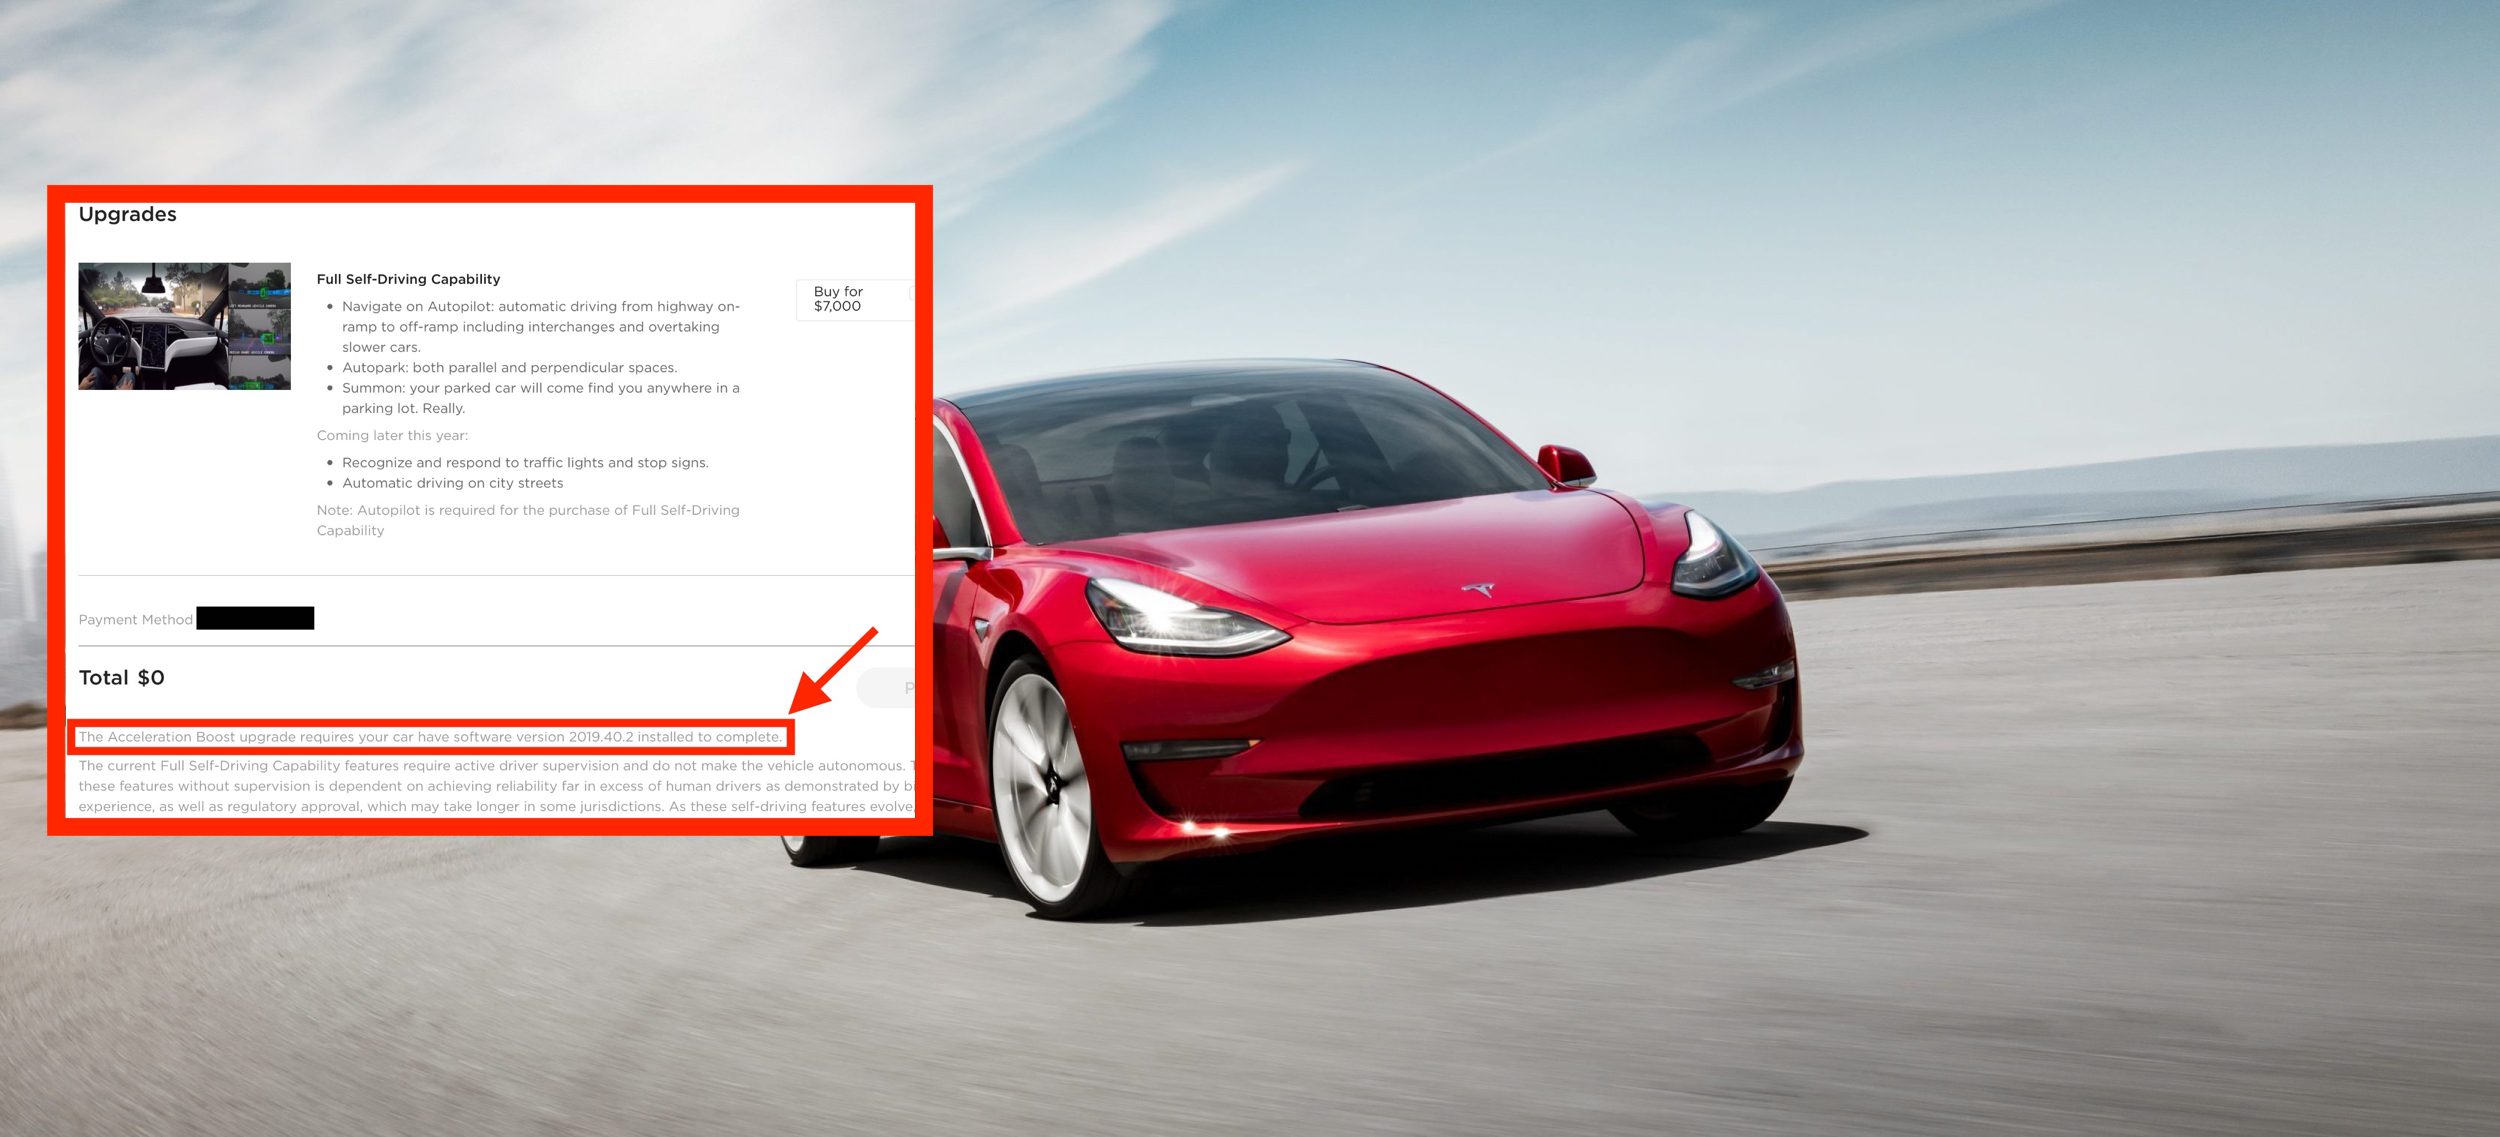 Tesla Model 3 'Acceleration Boost' tested: 0-60 in 3.8, more power and  torque - Electrek